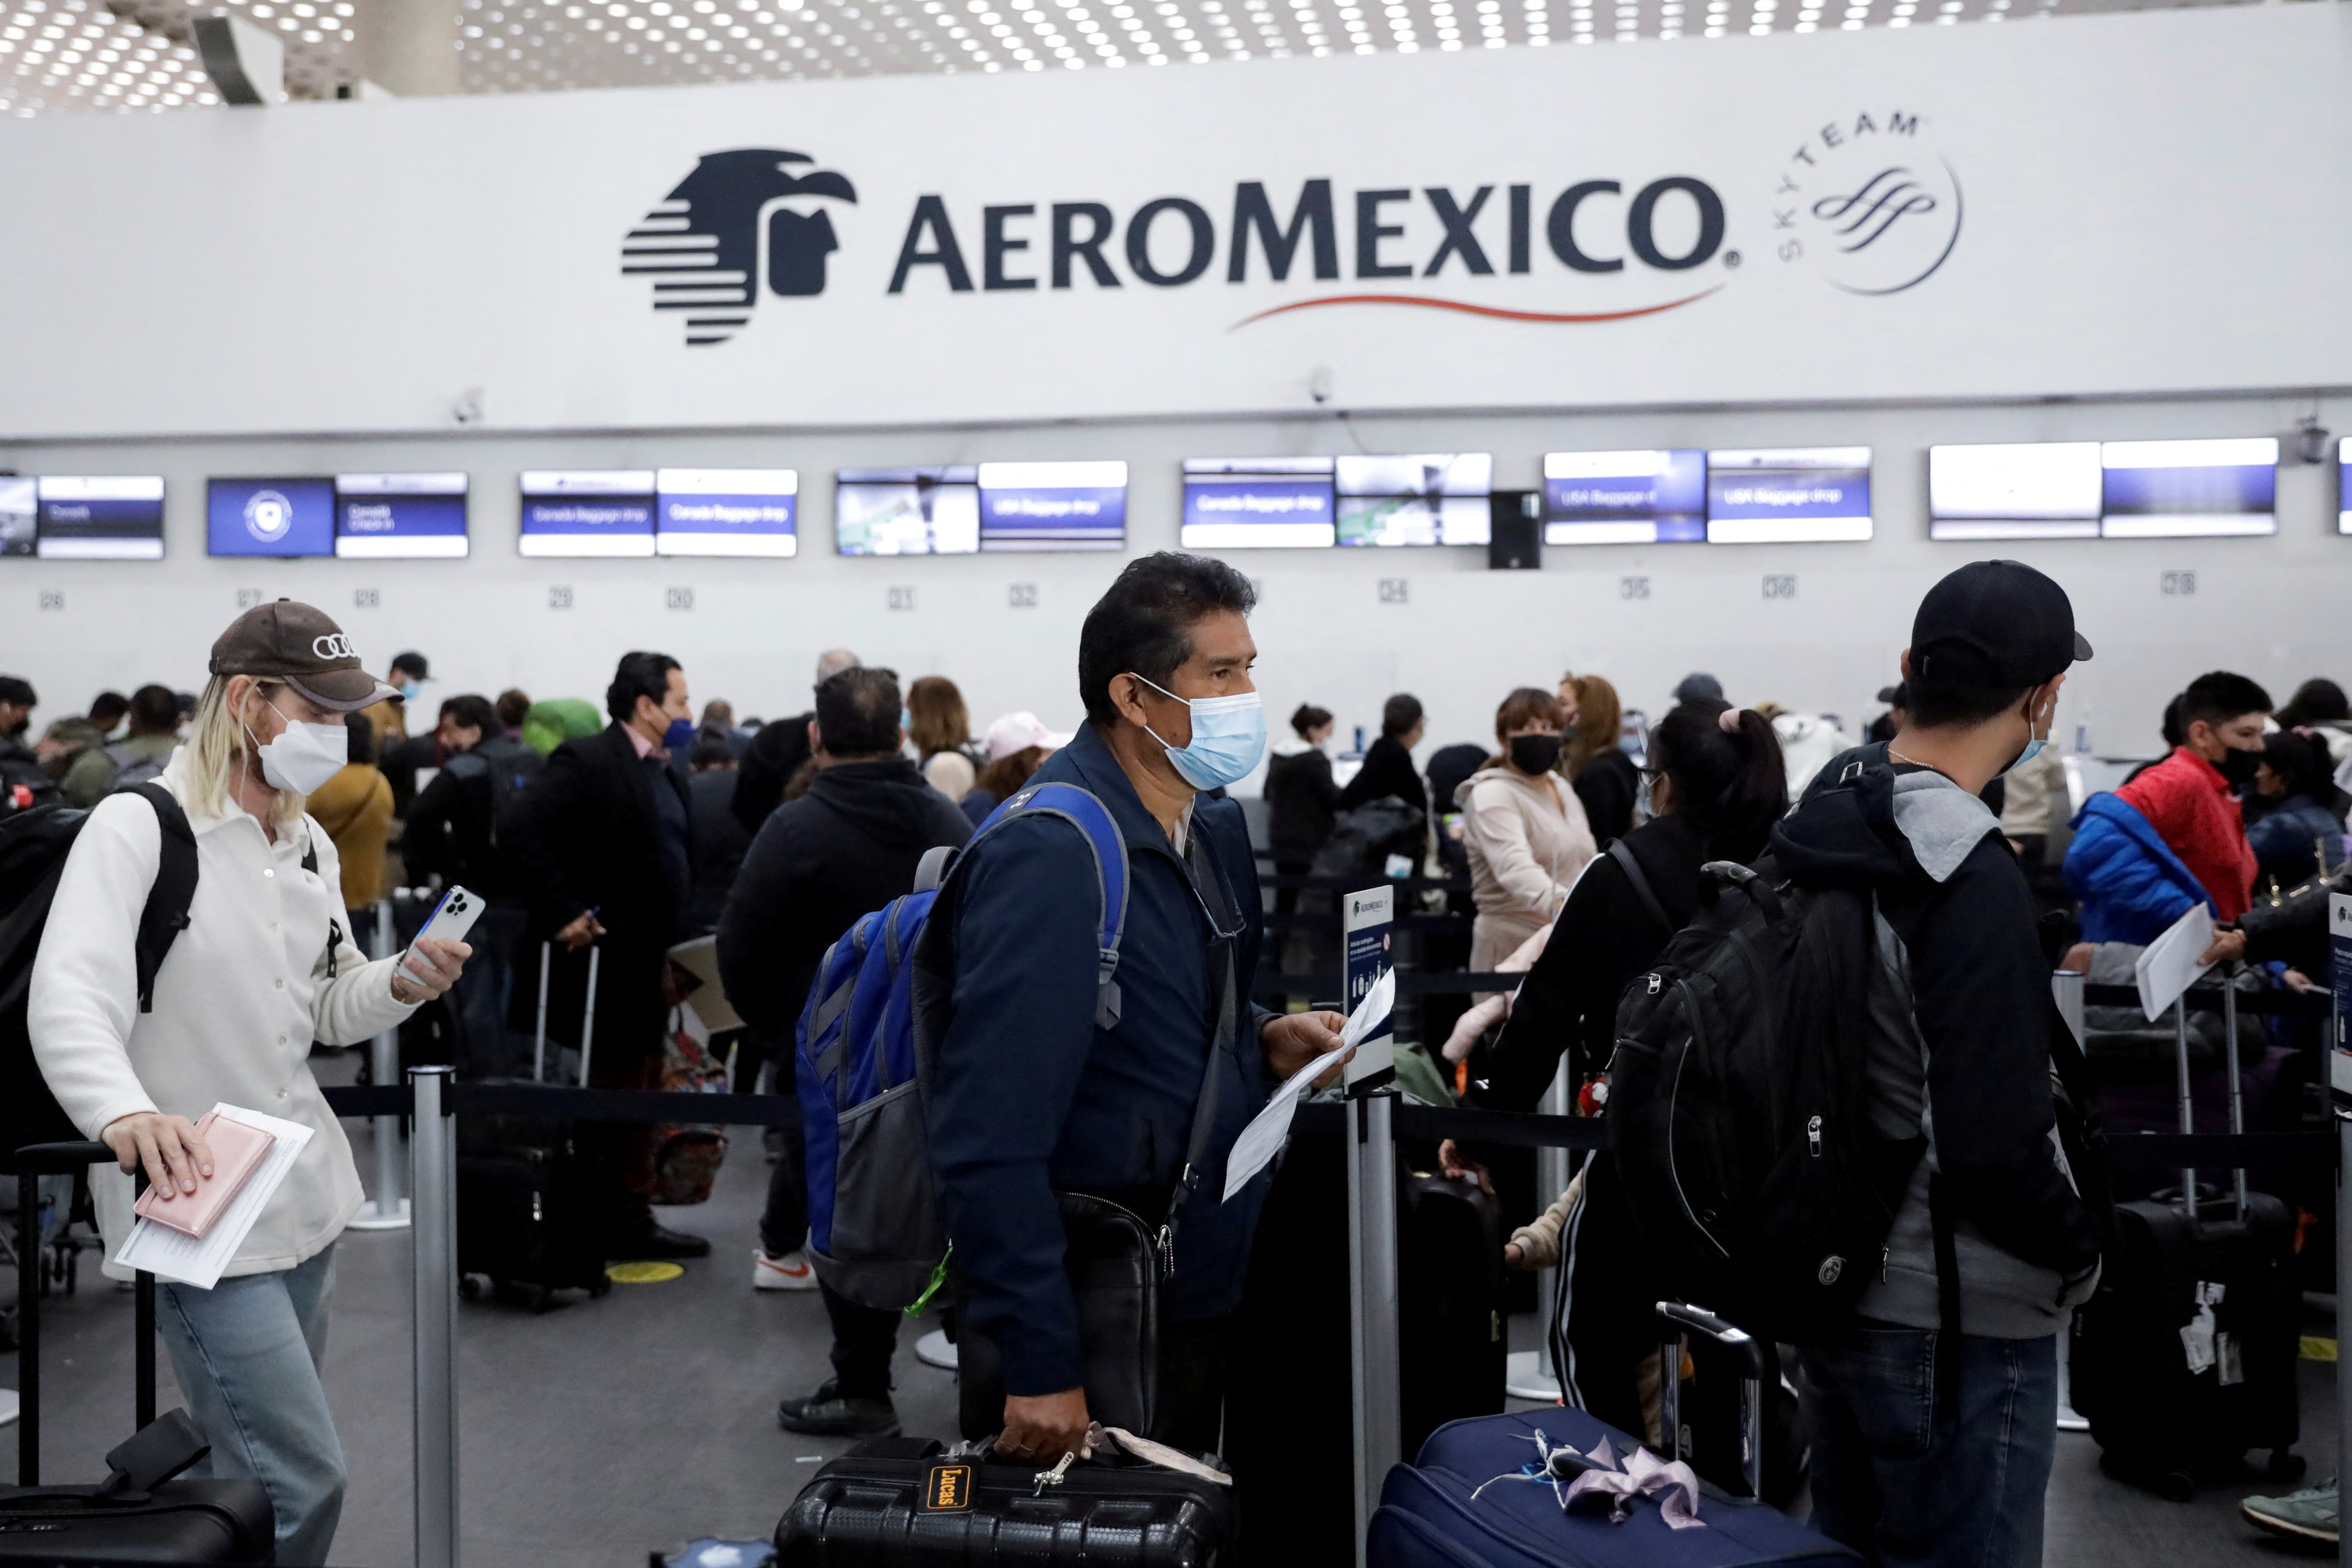 Along with Aeromexico, other companies were also allowed (Photo: REUTERS/Luis Cortes/File Photo)